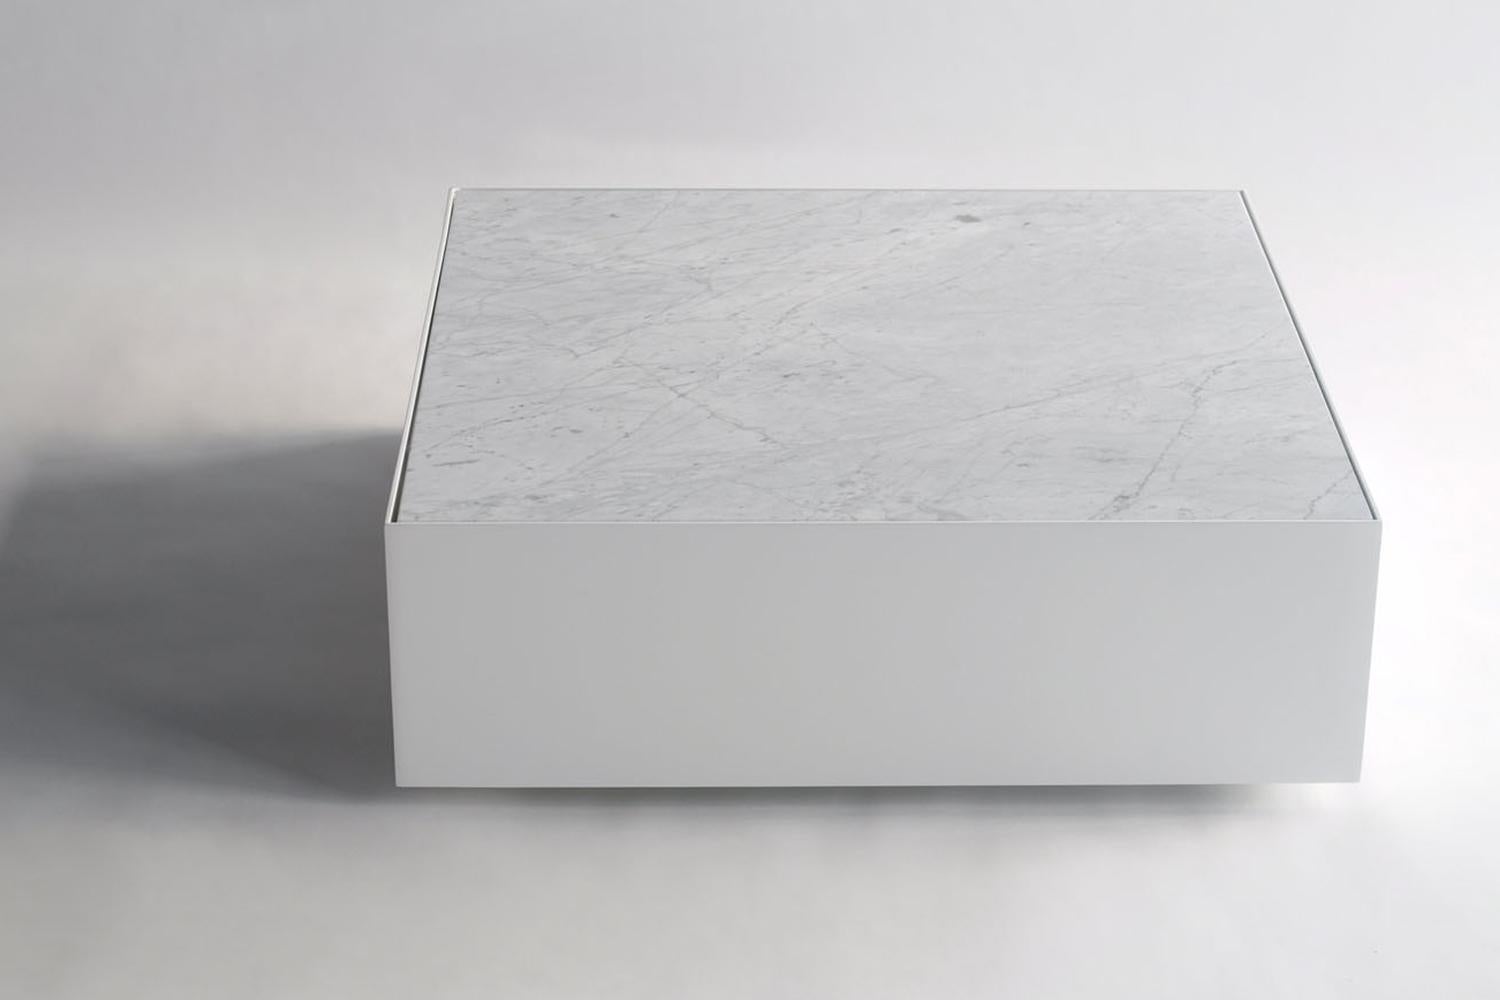 The ballot box invokes the spirit of minimalist artist Donald Judd. Crisp lines unify to create a steel box, and a sleek sunken marble top is punctuated with a rectangular cut out. The table is constructed out of steel and finished with chrome